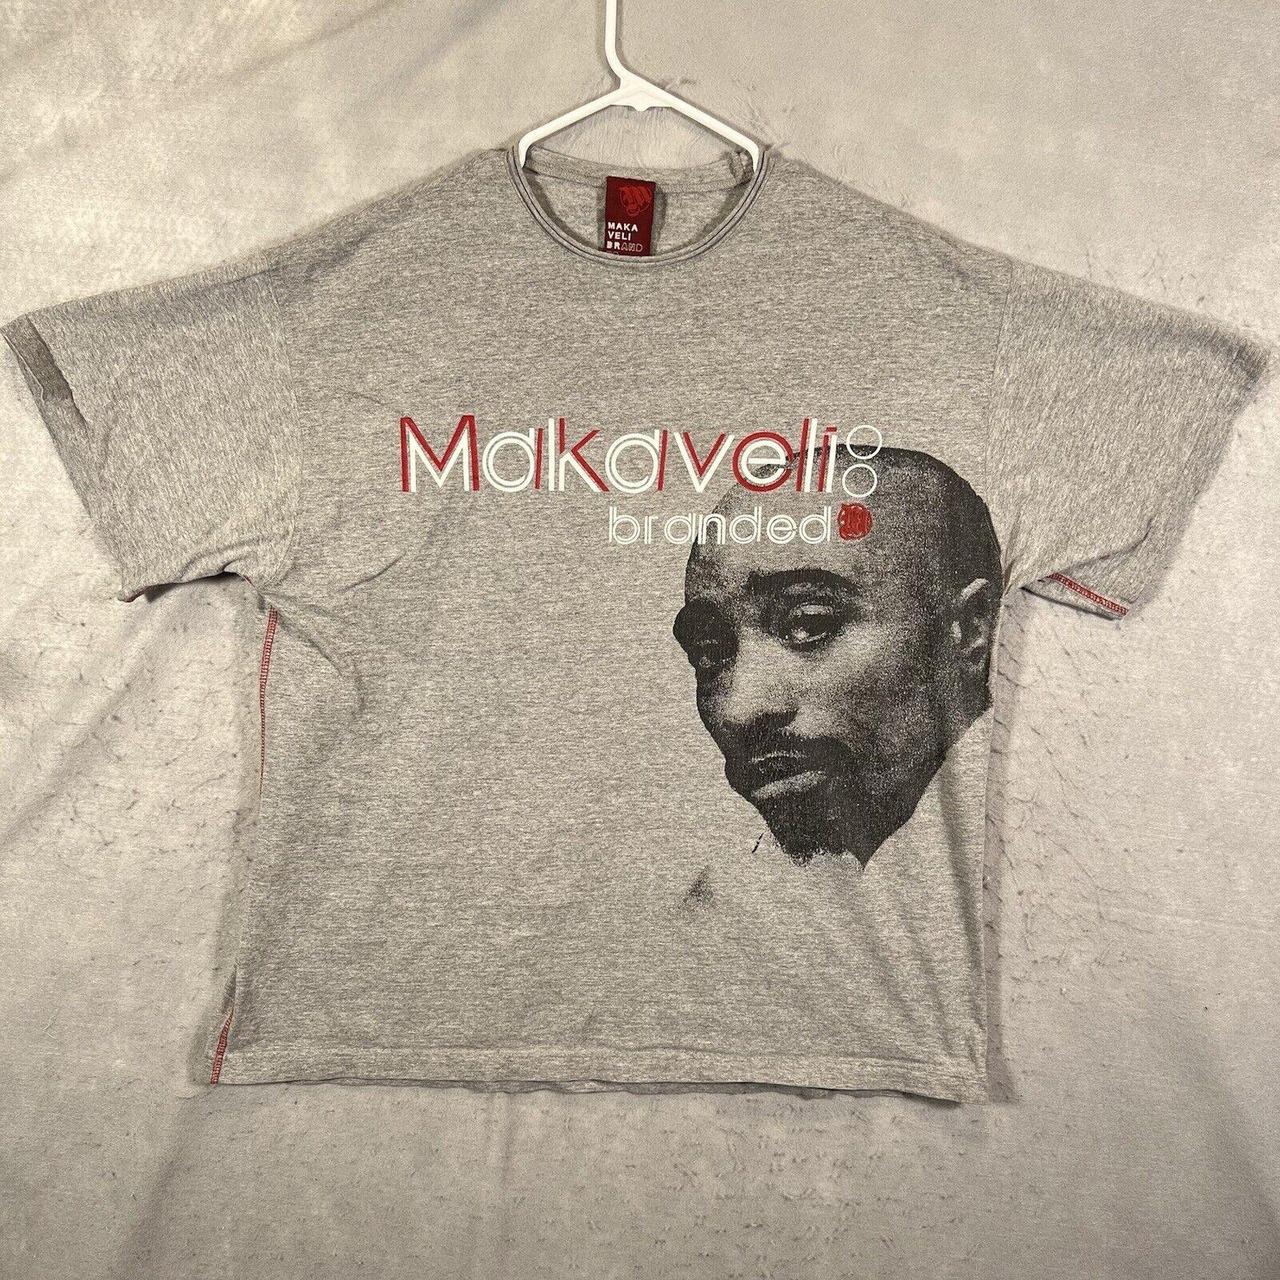 Product Image 1 - A1 MAKAVELI BRANDED 2 PAC